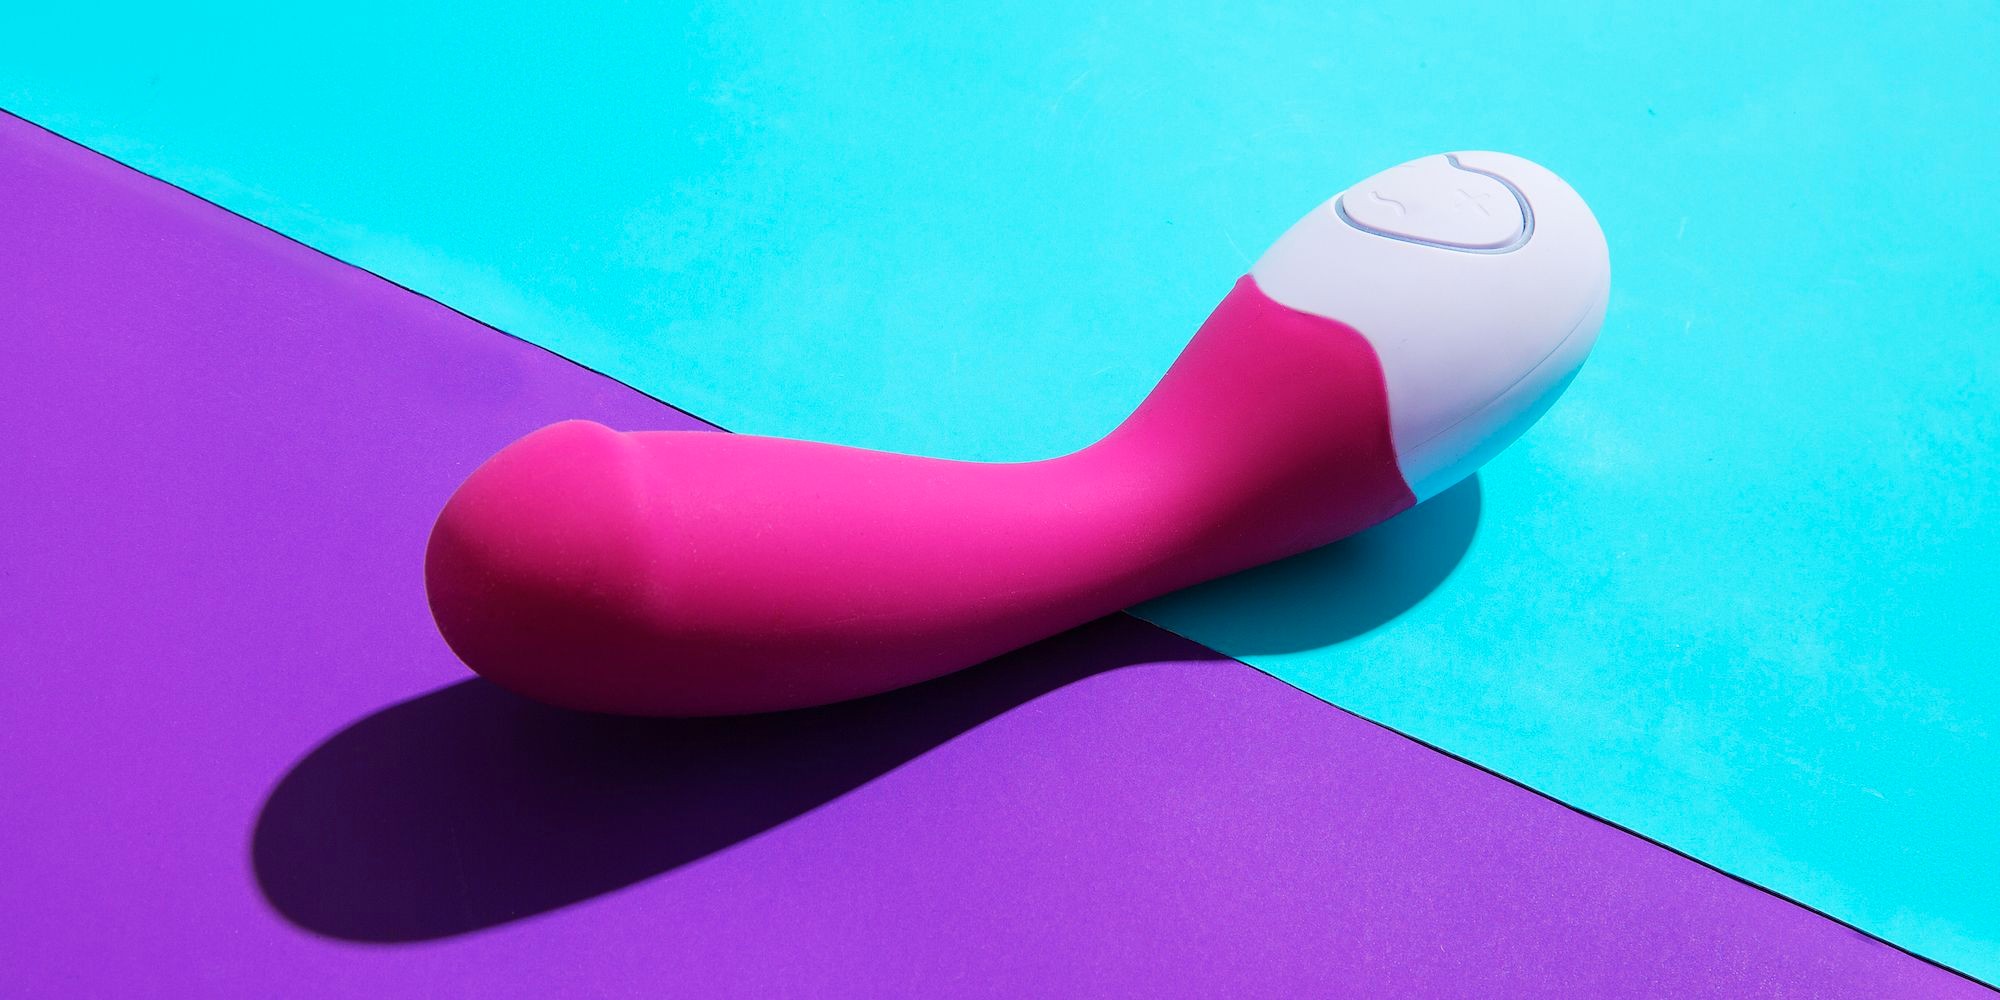 Why You Should Add Vibrators To Your Sex Life